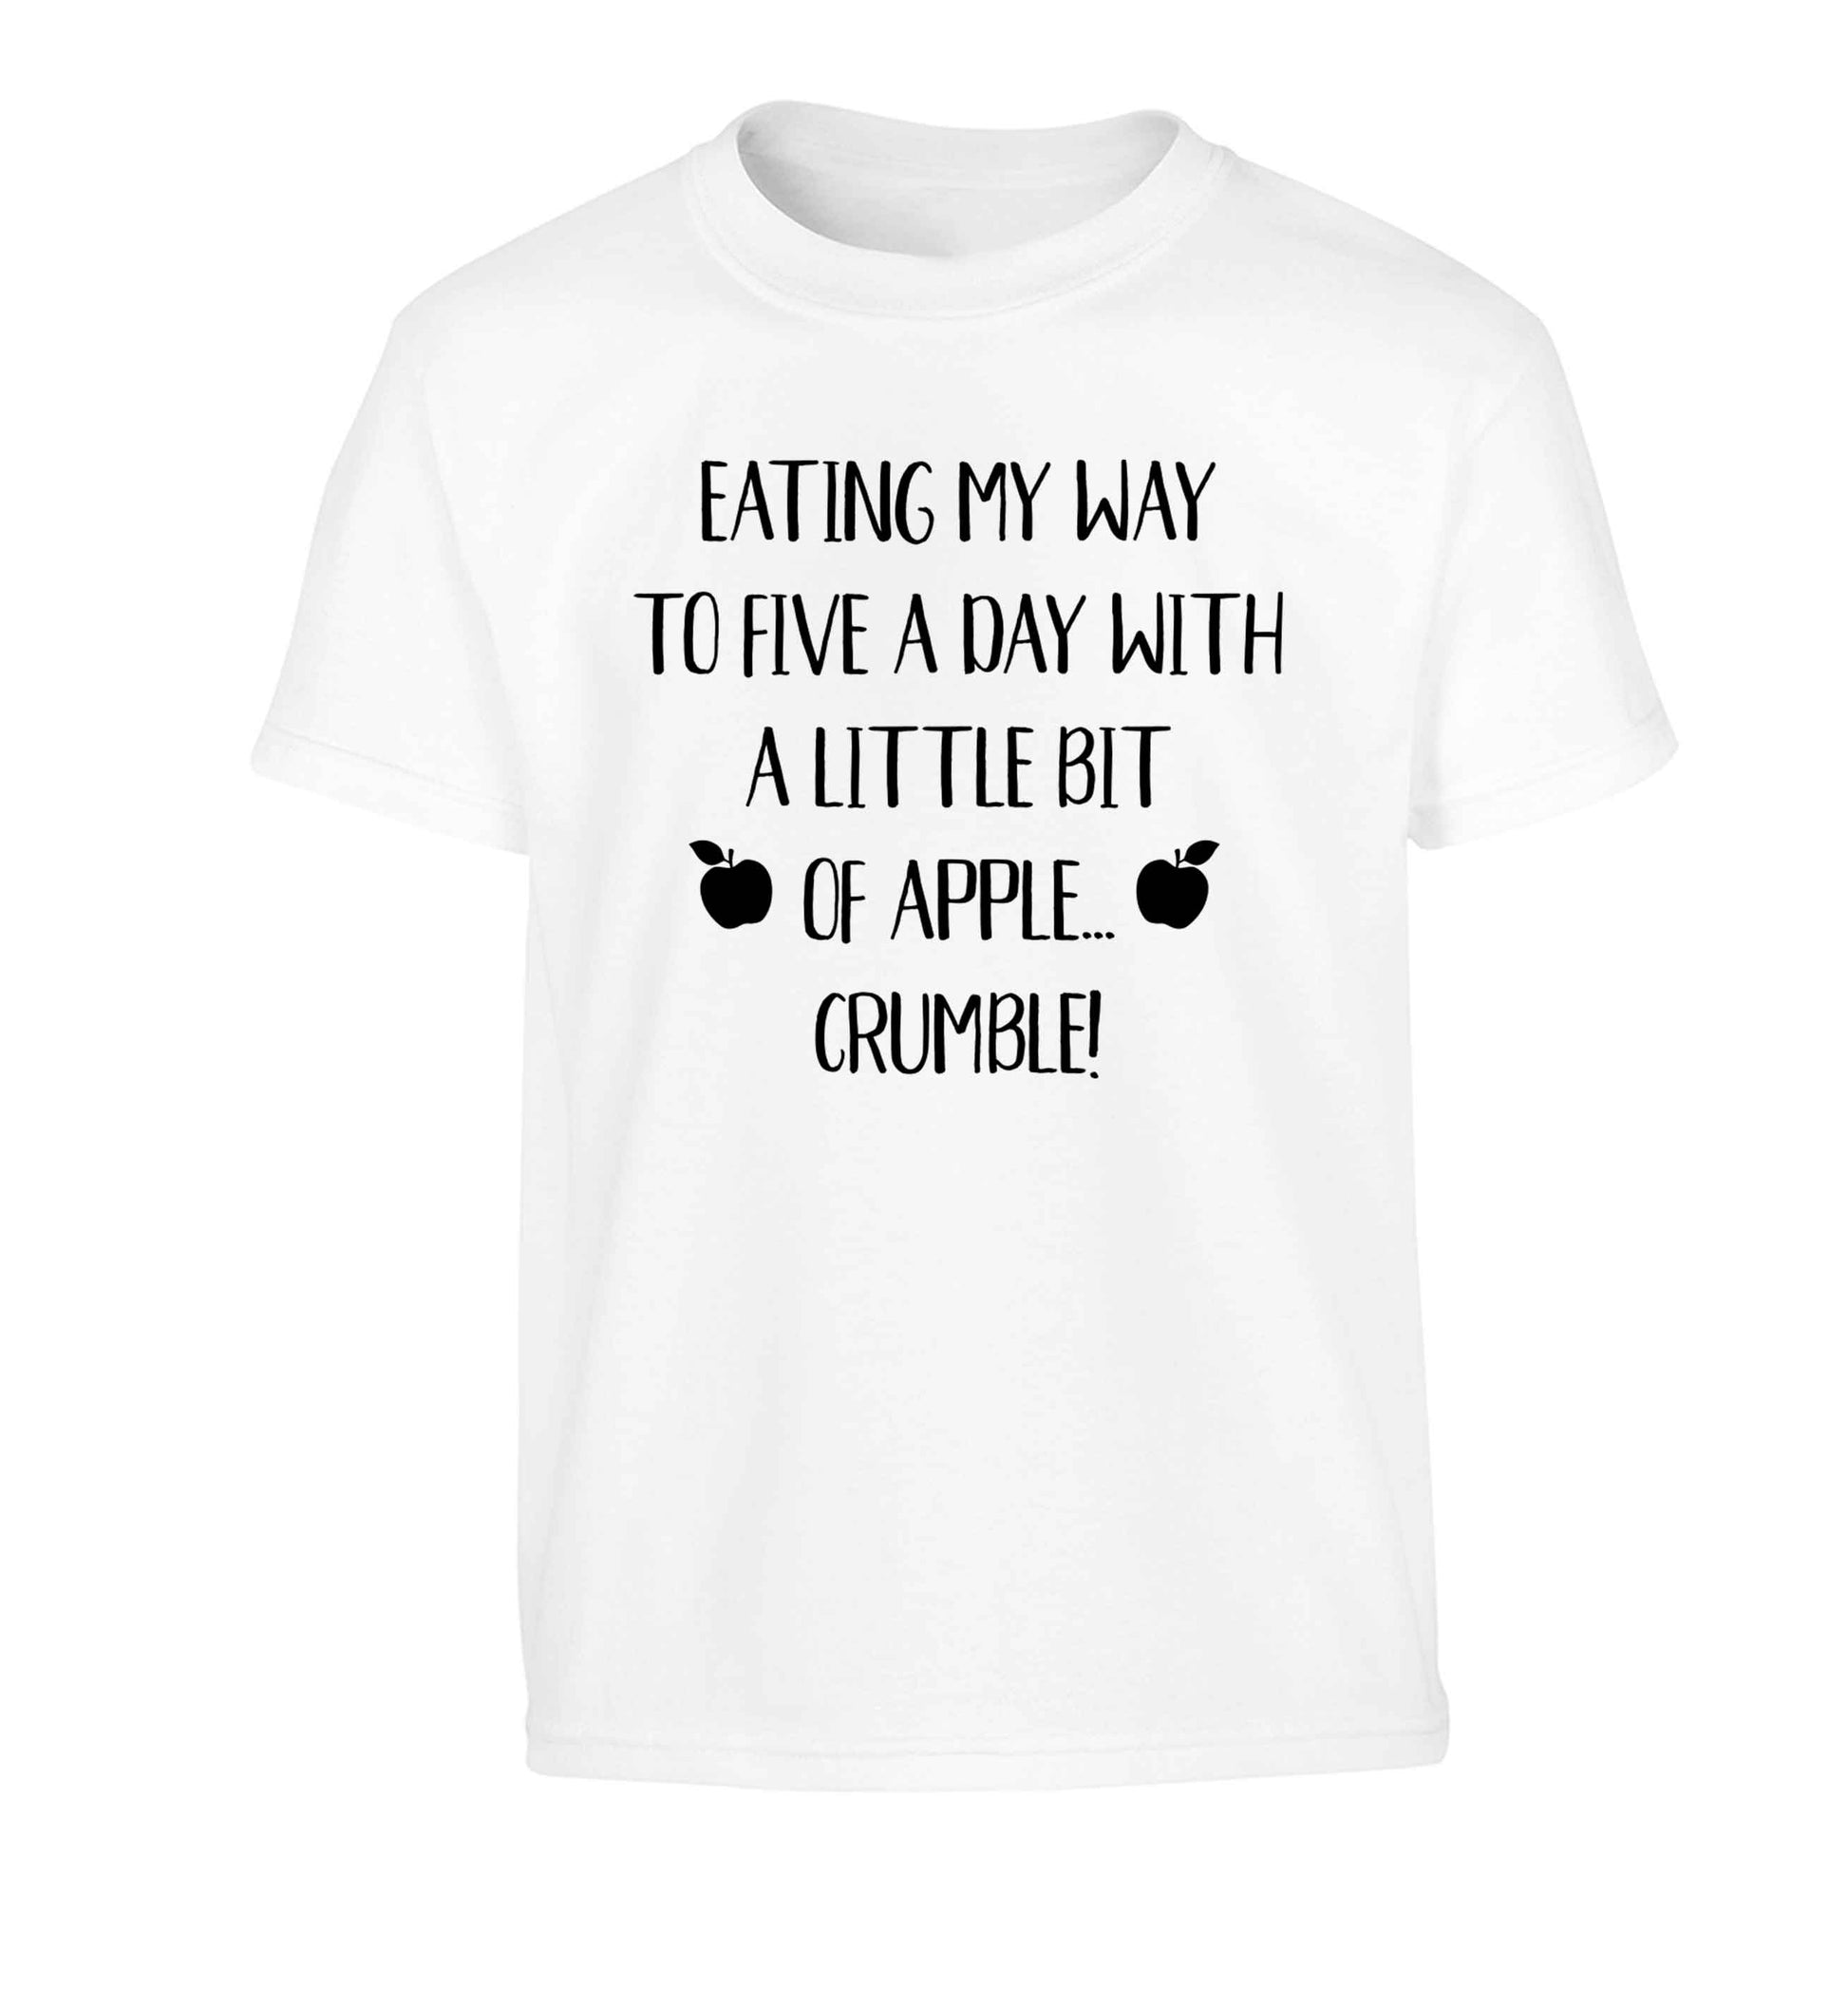 Eating my way to five a day with a little bit of apple crumble Children's white Tshirt 12-13 Years